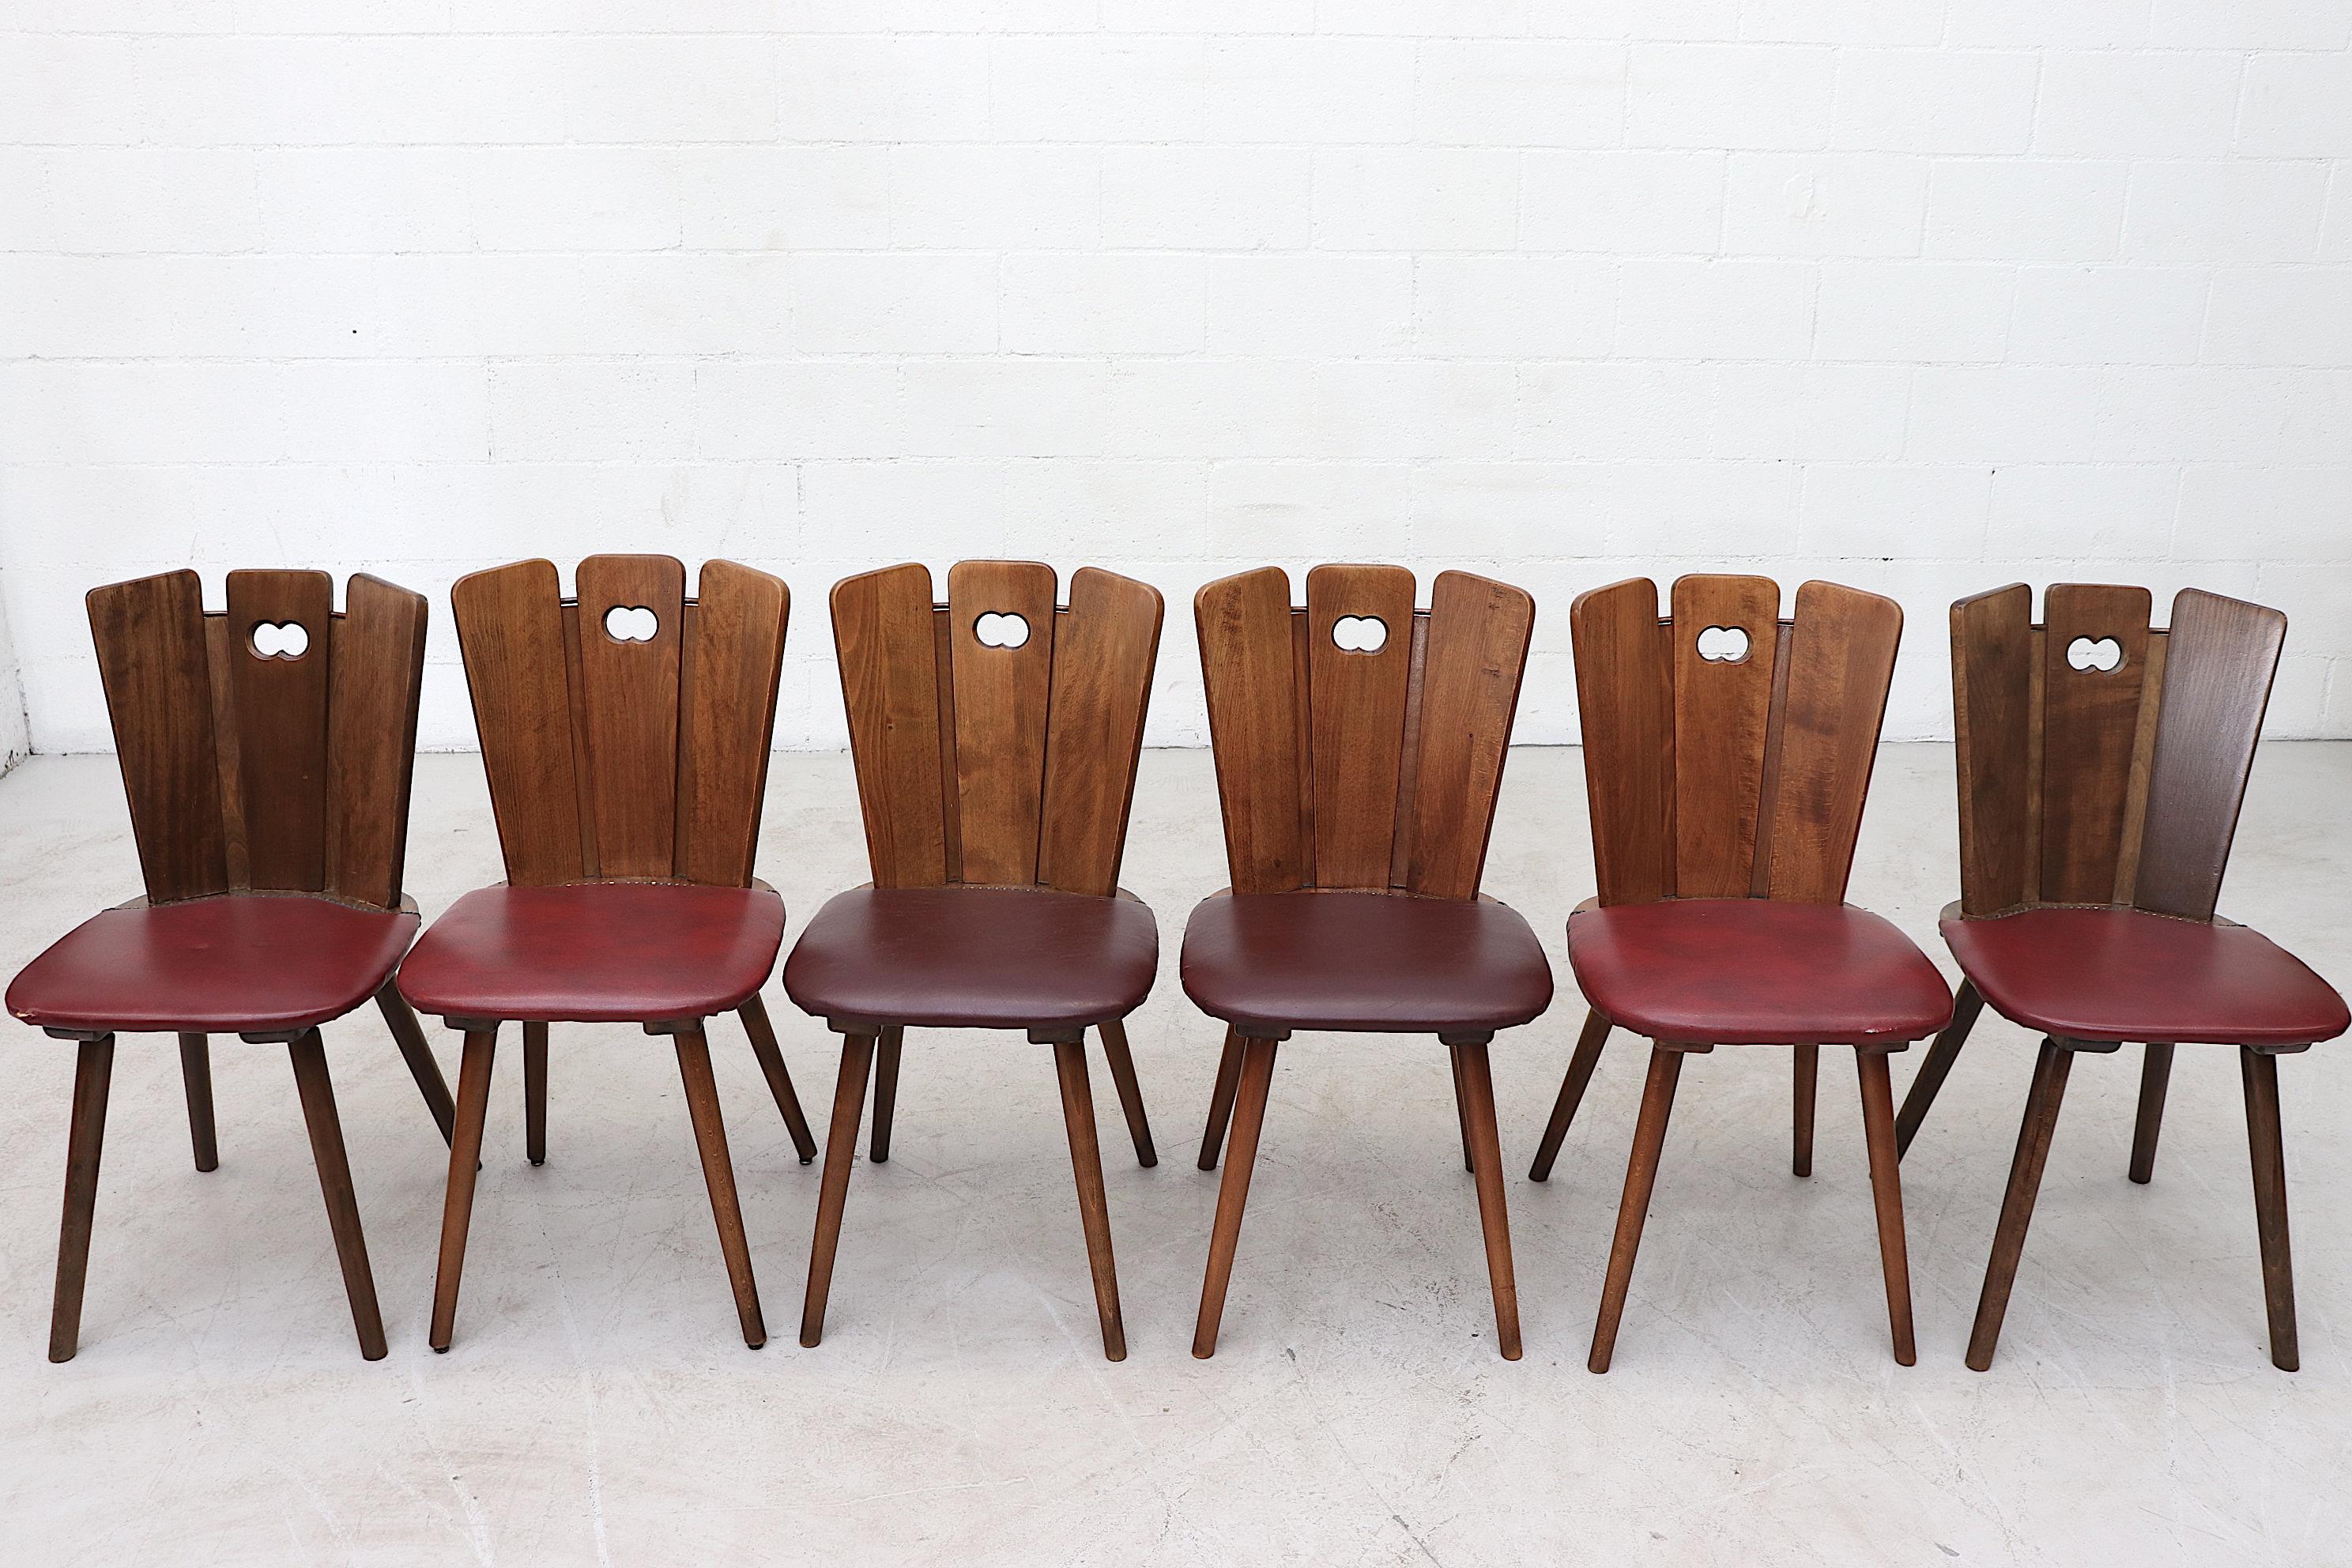 Beautiful Gilbert Marklund Style Brutalist Dining Chairs with Fan-Top Seat Backs, Original Vinyl Seats and Nail-Head Detail. Lightly Refinished Wood. In Original Condition with Visible Tears on Seats. In need of new upholstery. Wear Consistent to